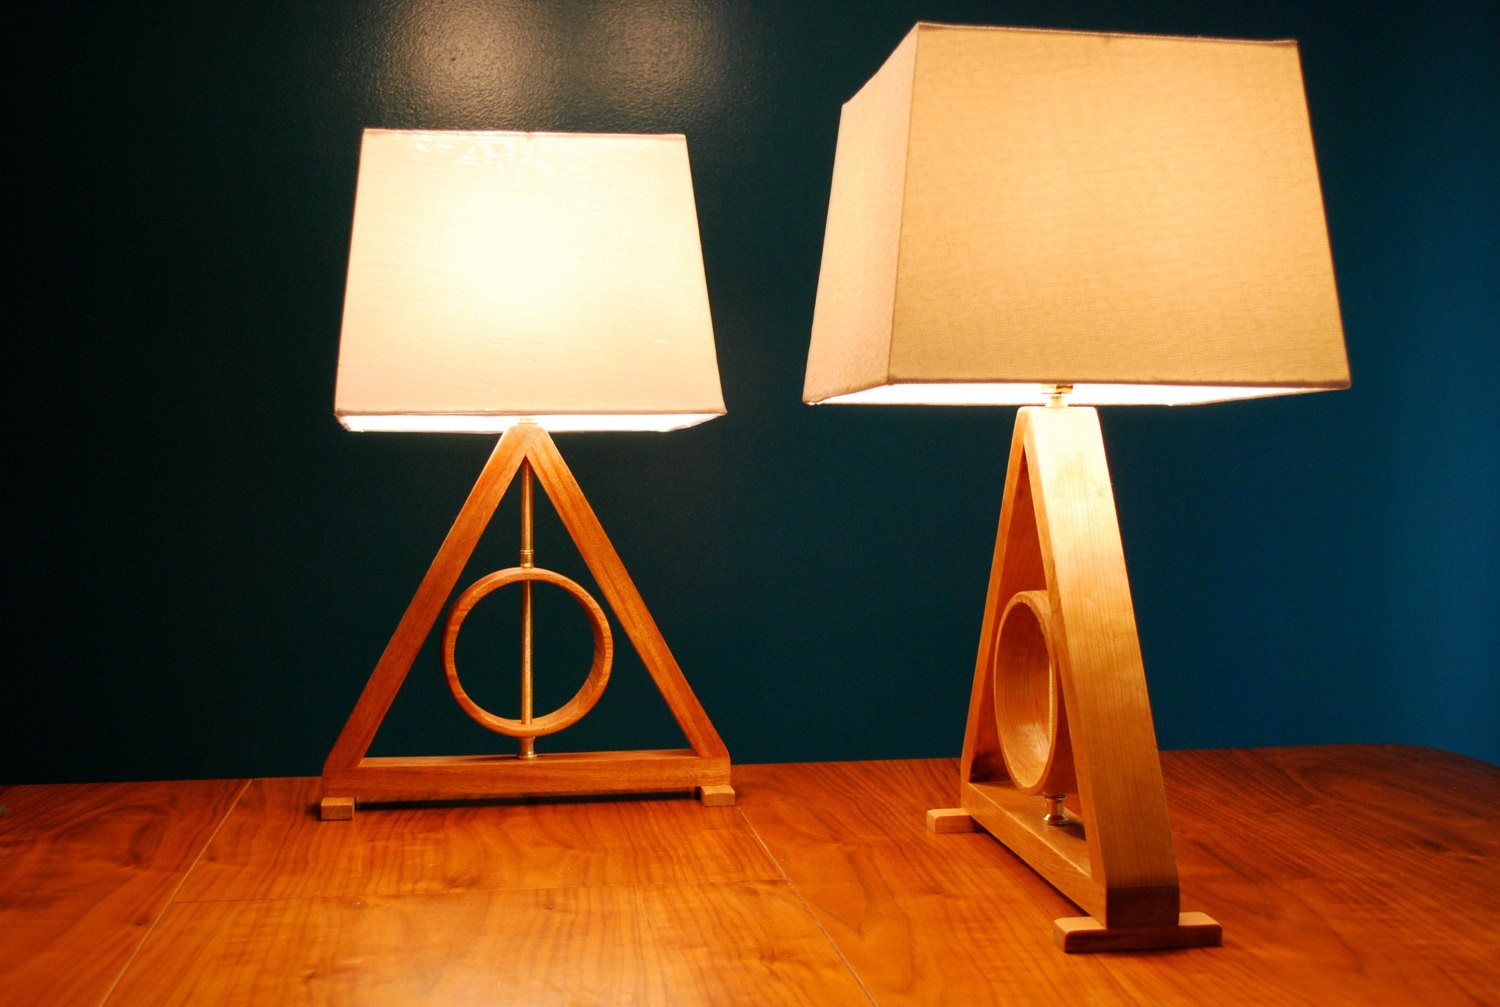 Harry potter deathly hallows table lamp harry potter kids lamp